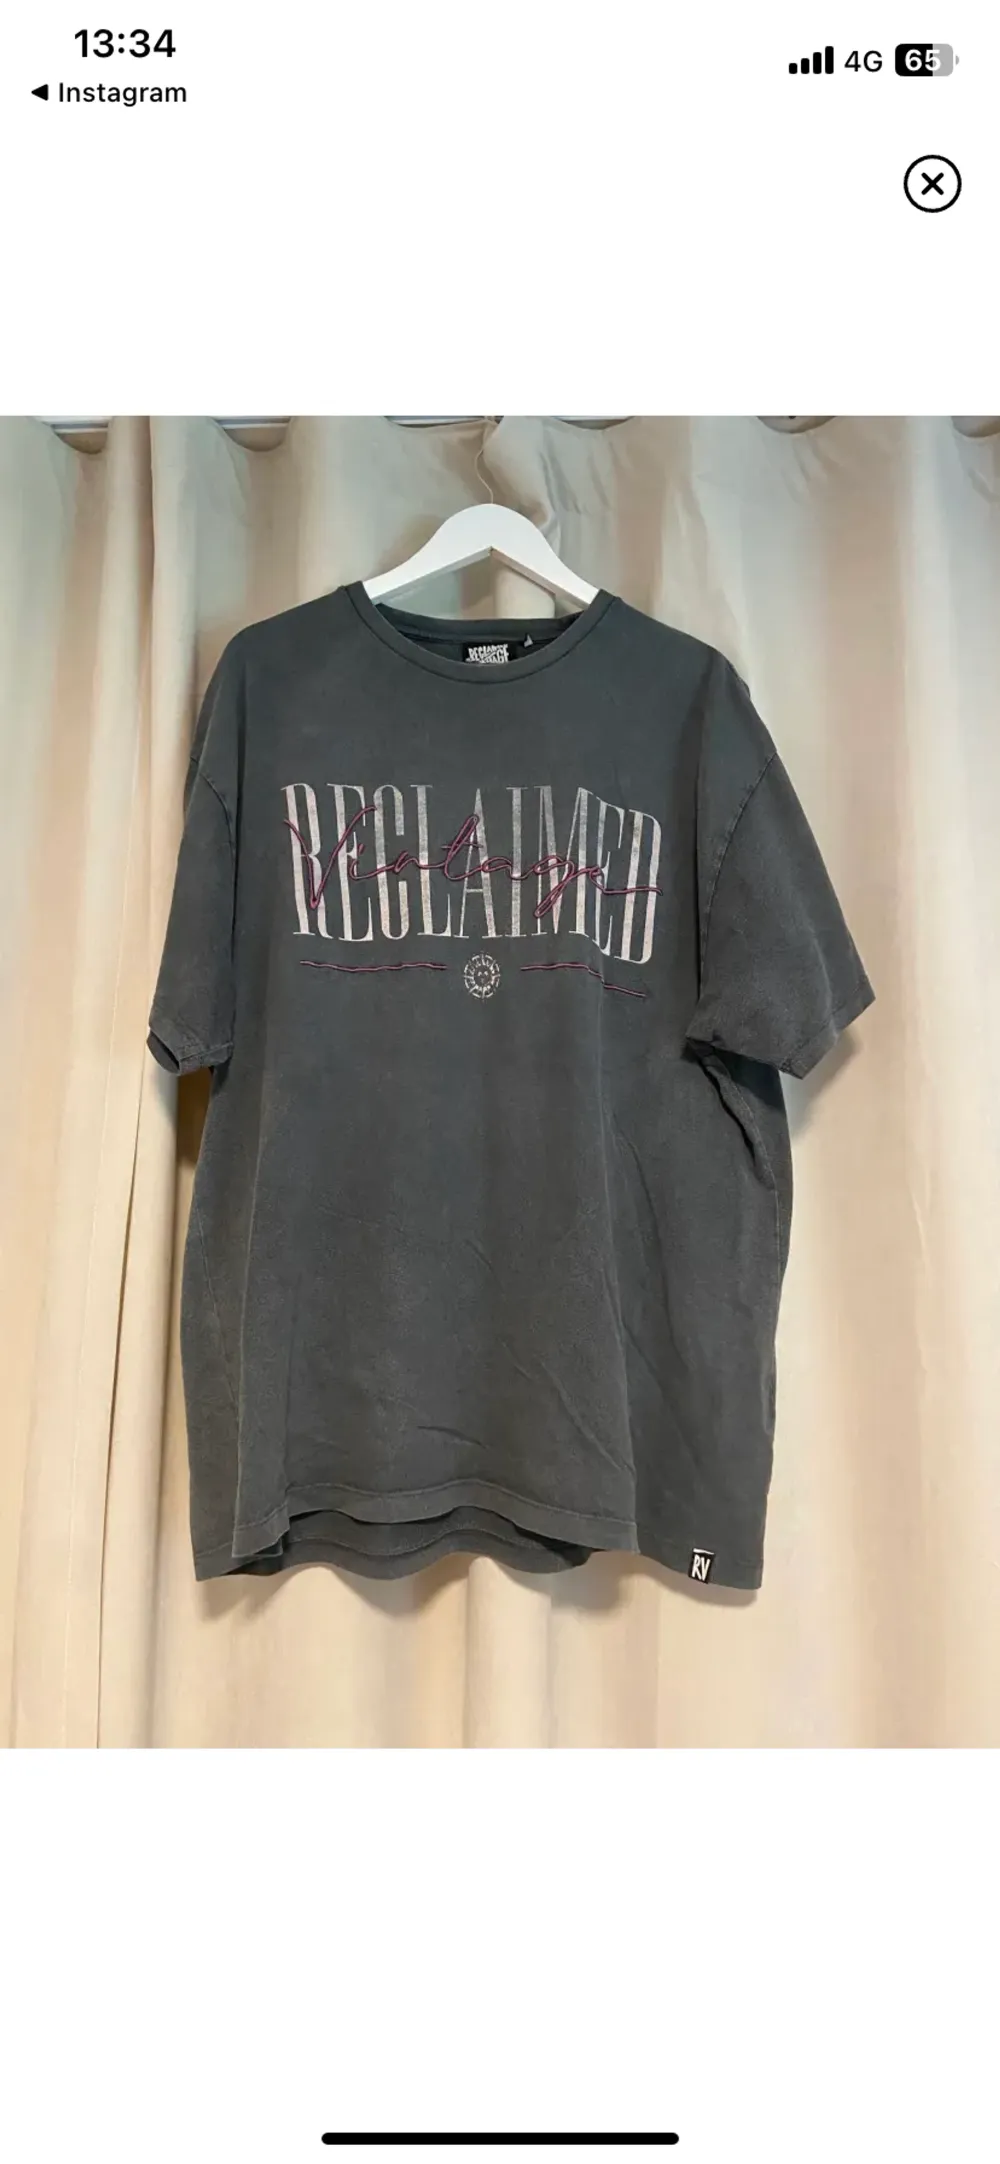 Reclaimed Vintage. T-shirts.